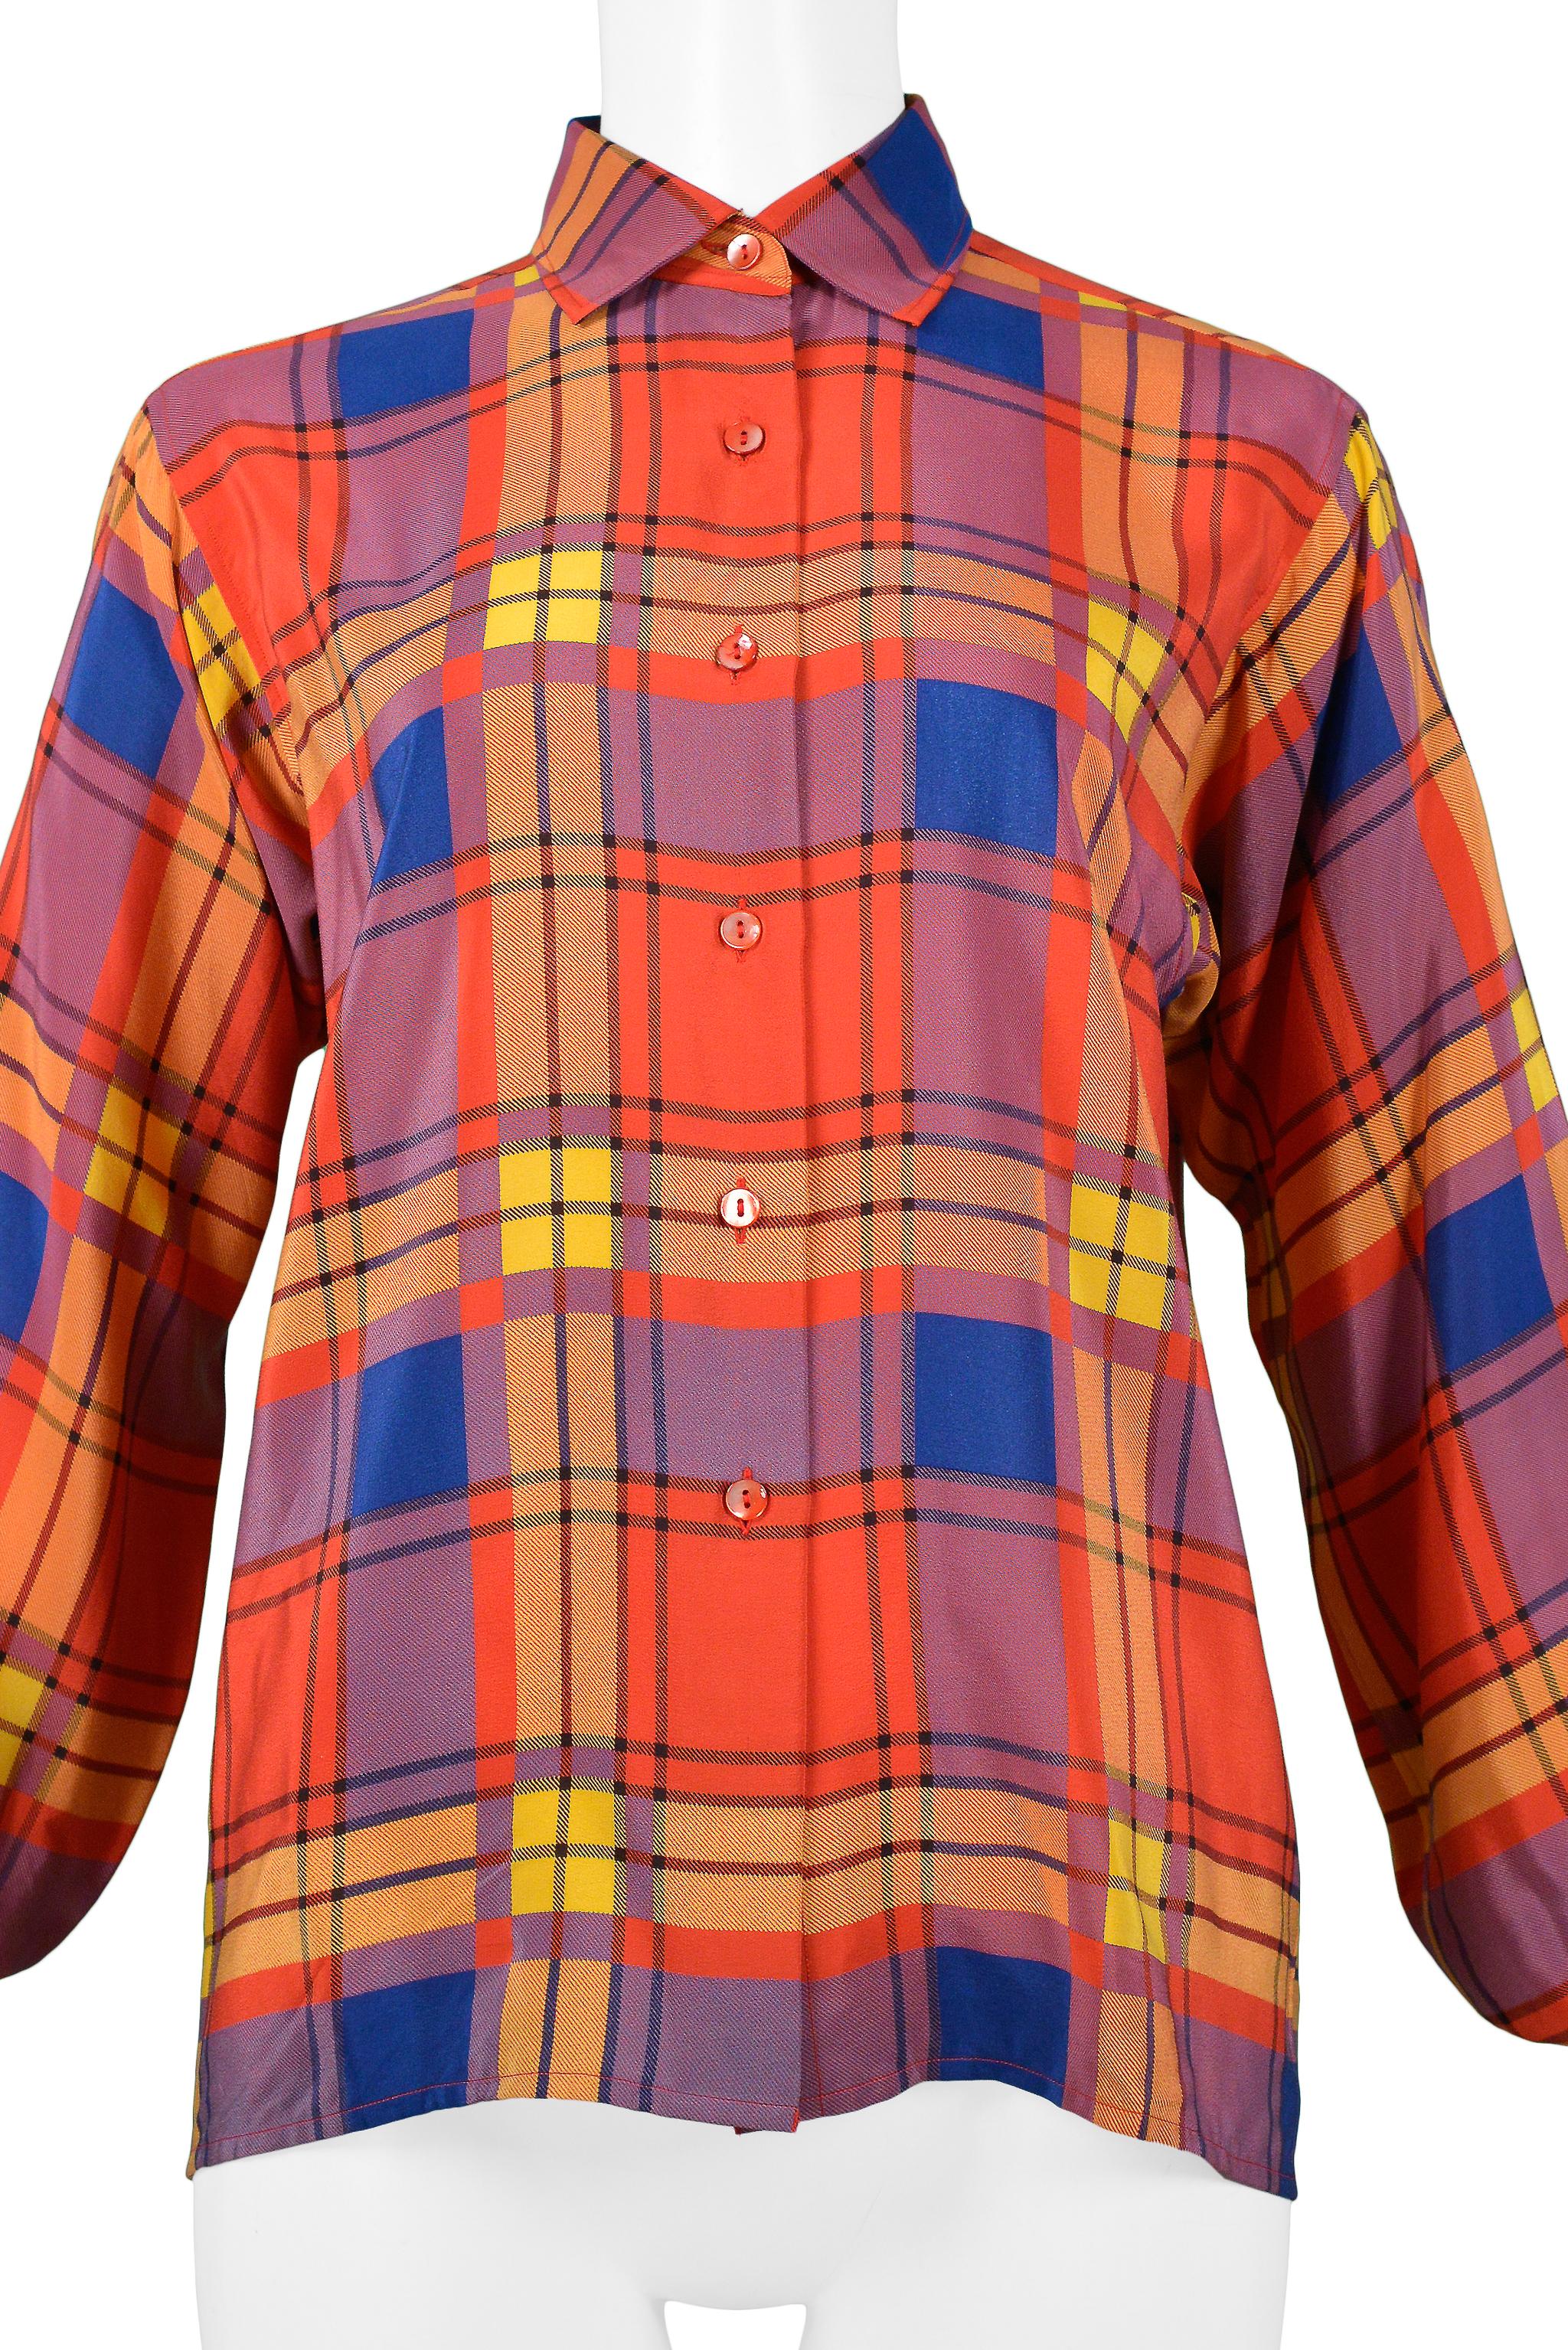 Resurrection Vintage is excited to offer a vintage Yves Saint Laurent red, yellow and blue plaid silk button-front blouse. 

Yves Saint Laurent
Size 38
Measurements: Shoulders 16”, Bust 37”, Waist Free 
Silk
Excellent Vintage Condition
Appears